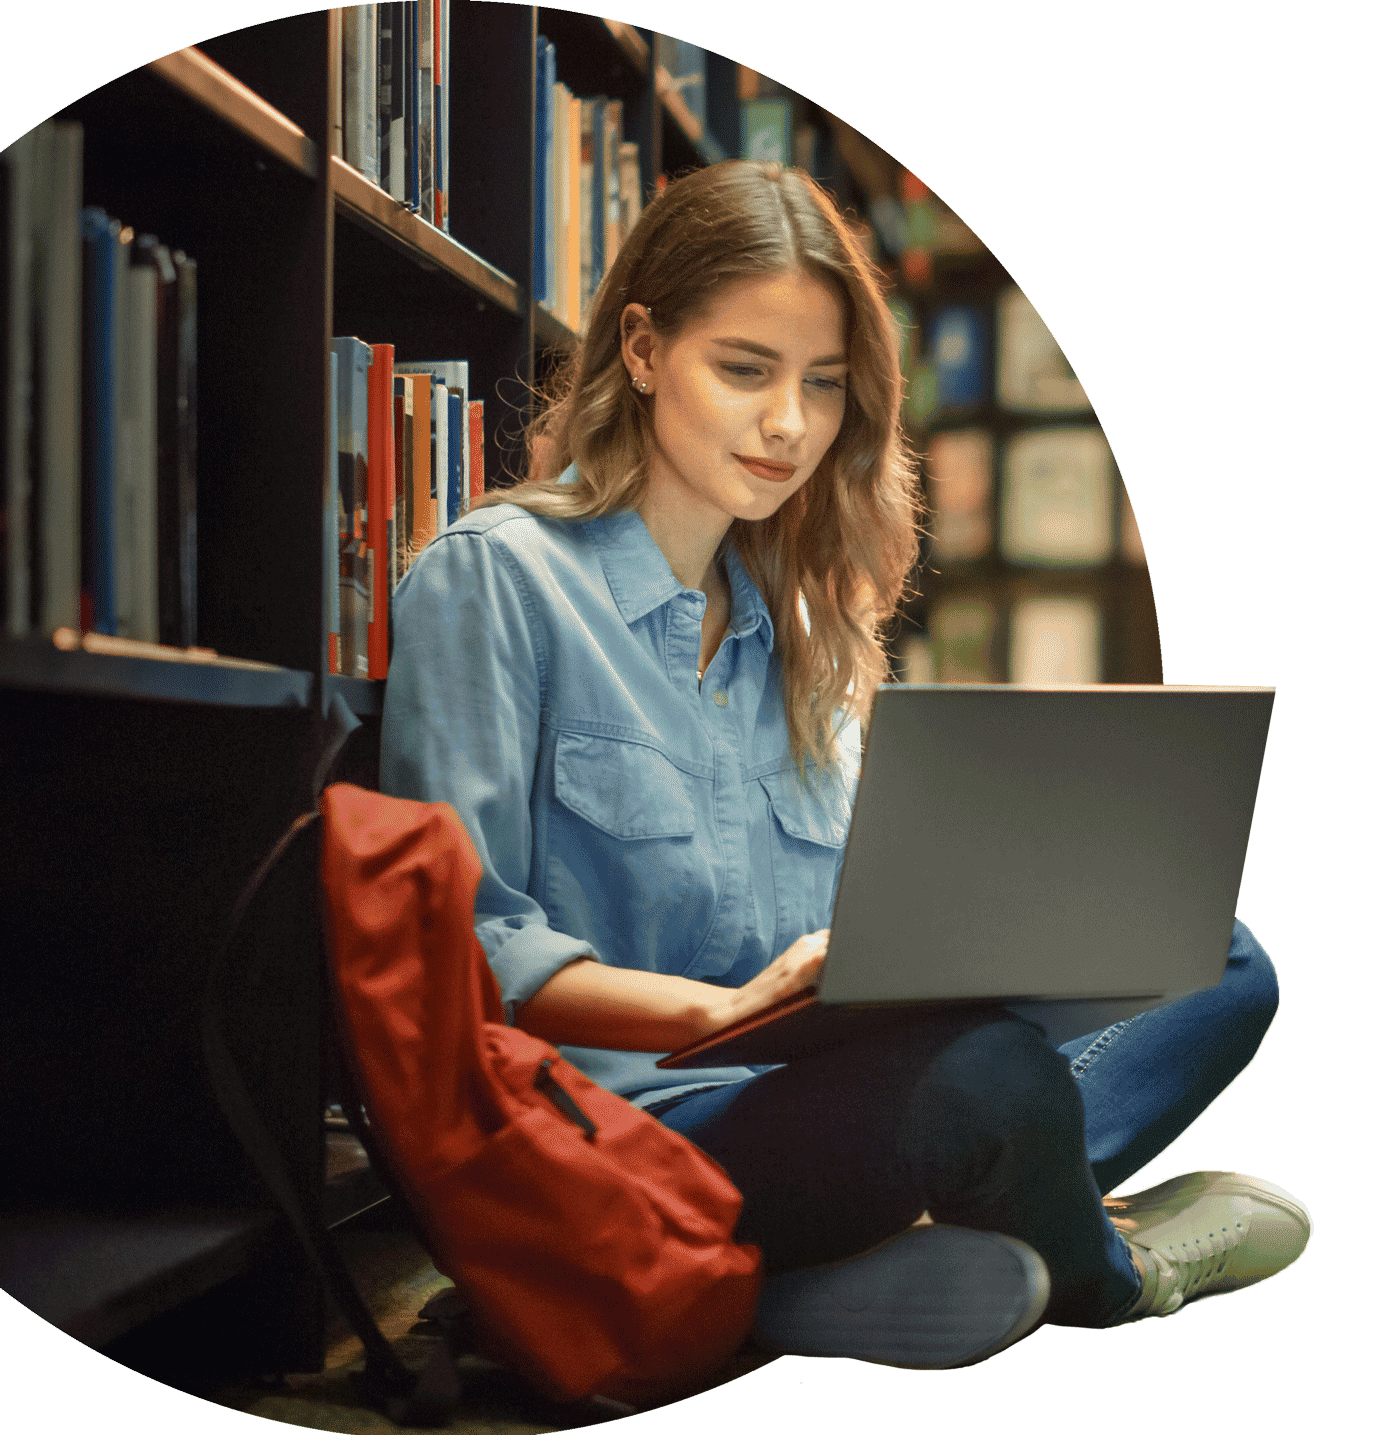 woman sitting against a library shelf with her backpack and laptop